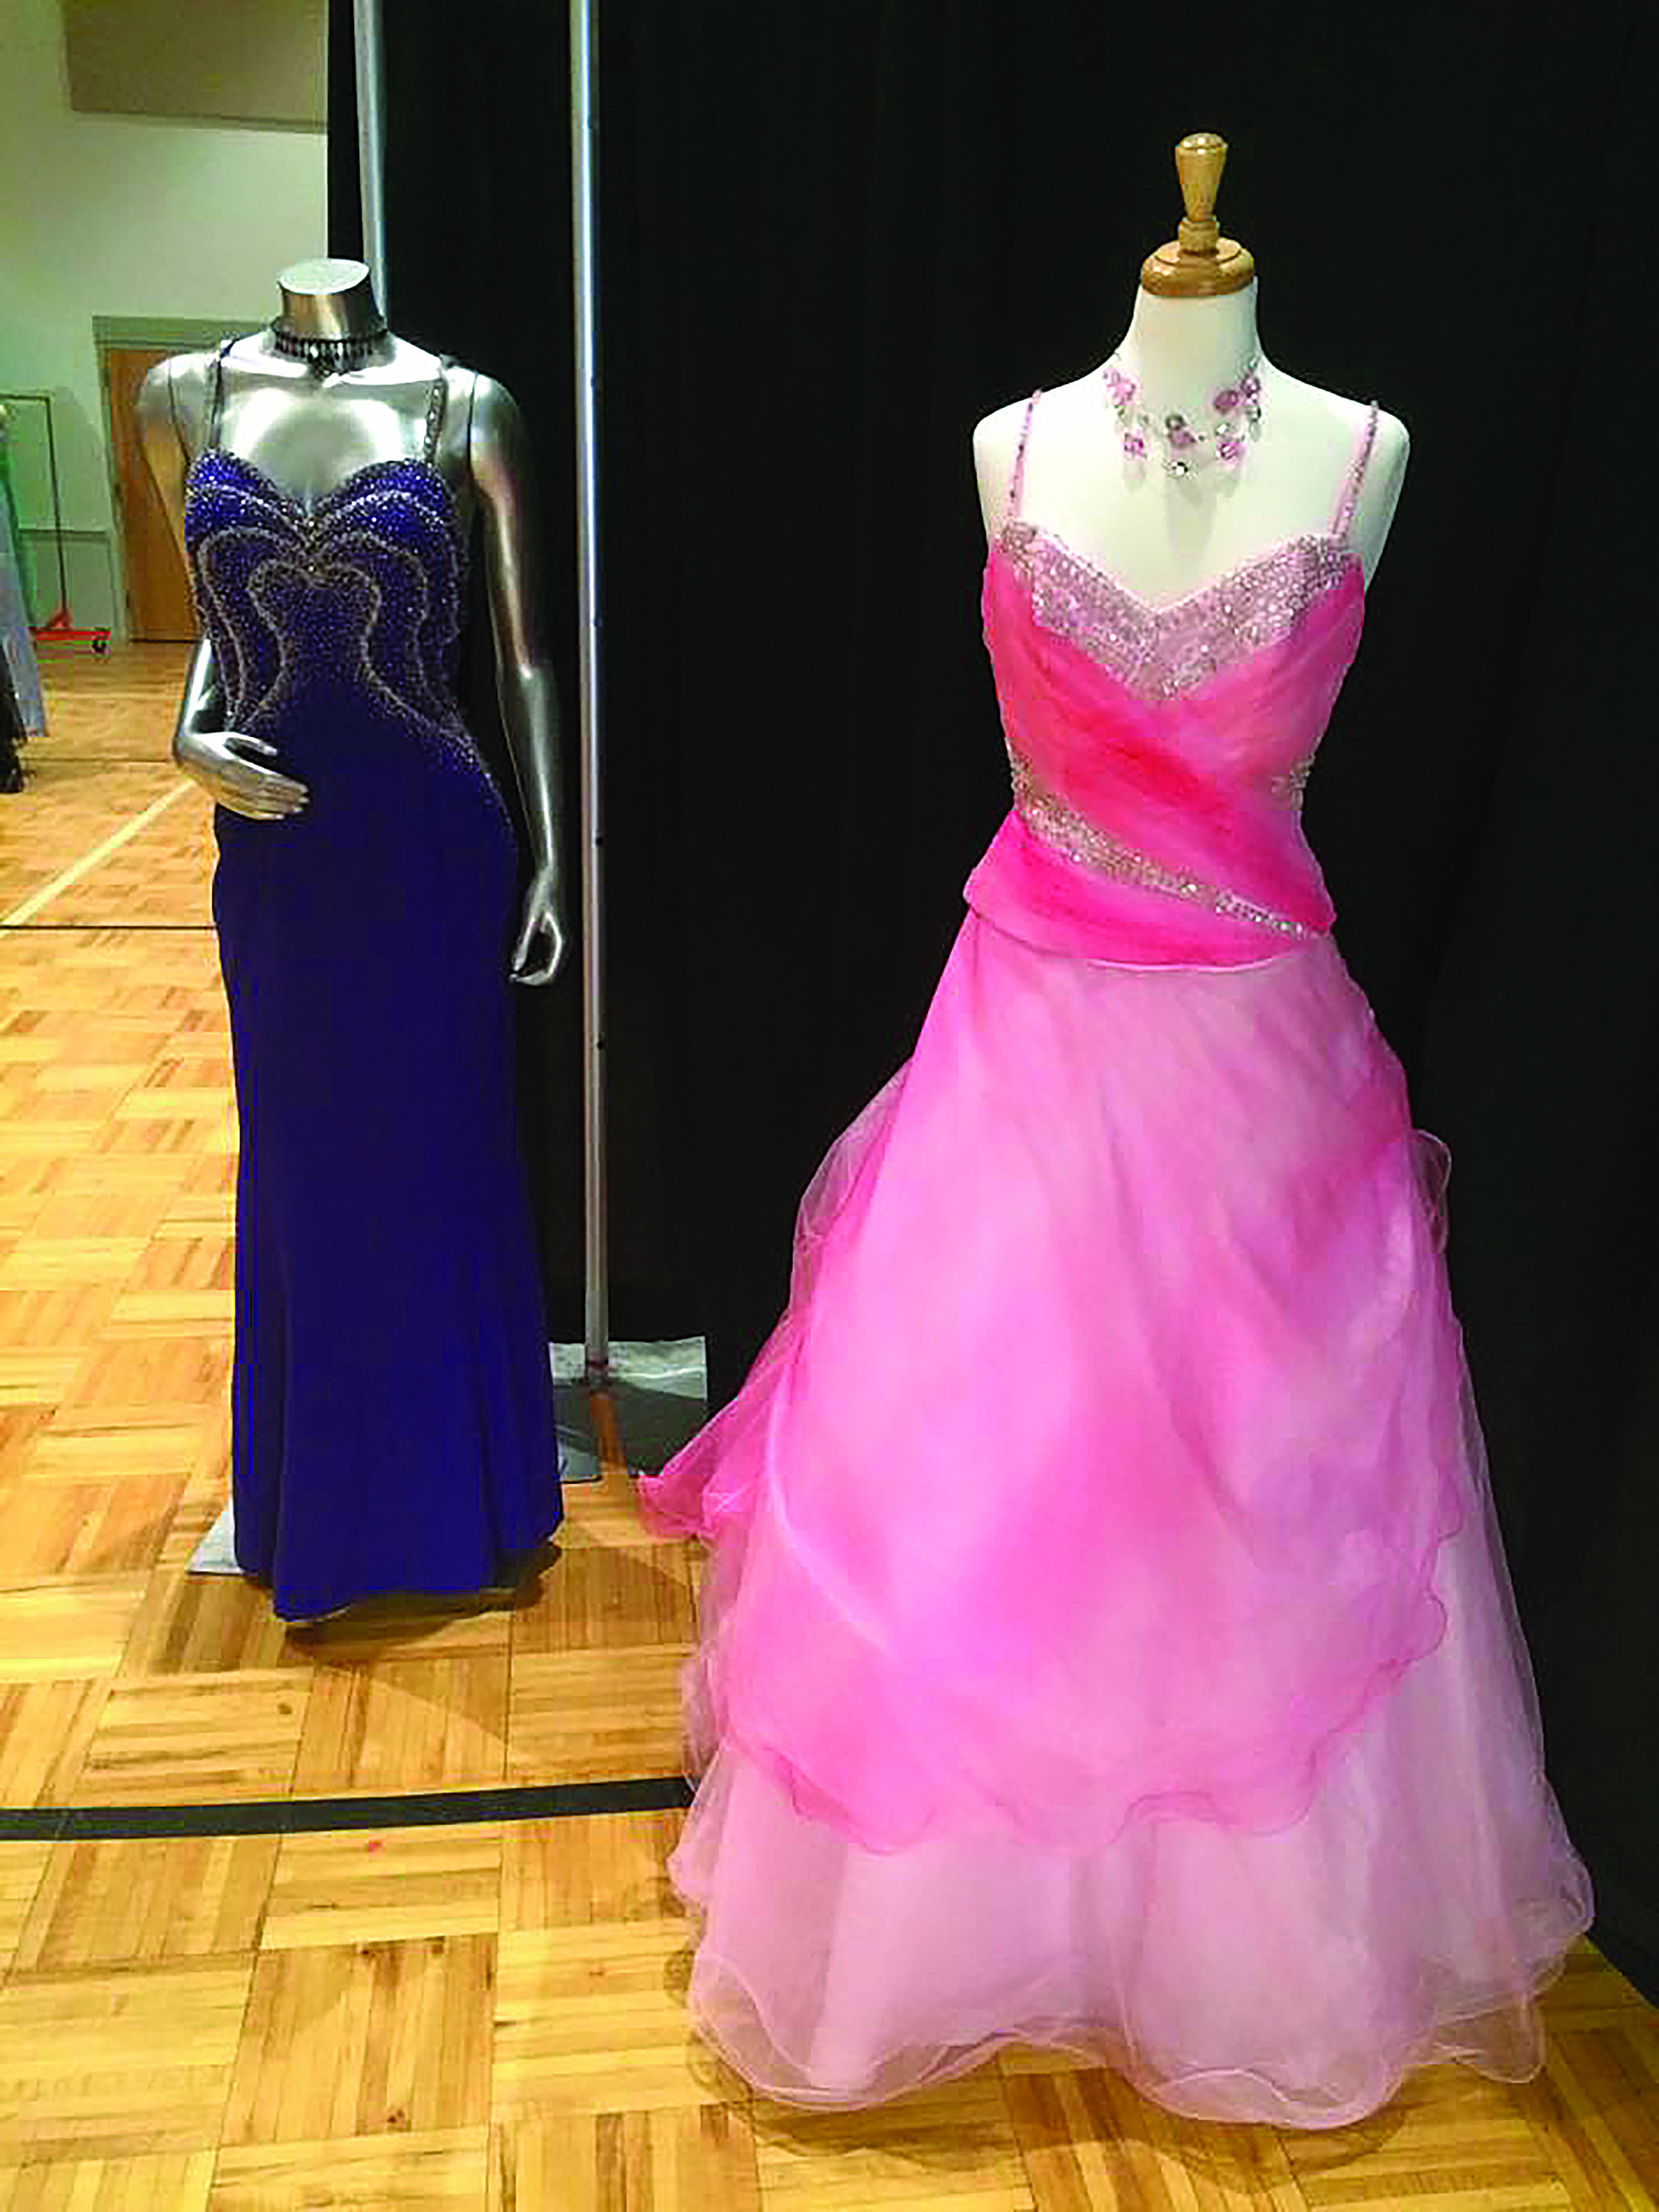 An Extraordinary Mission Provides the Perfect Prom Gown 				By Amy Iori